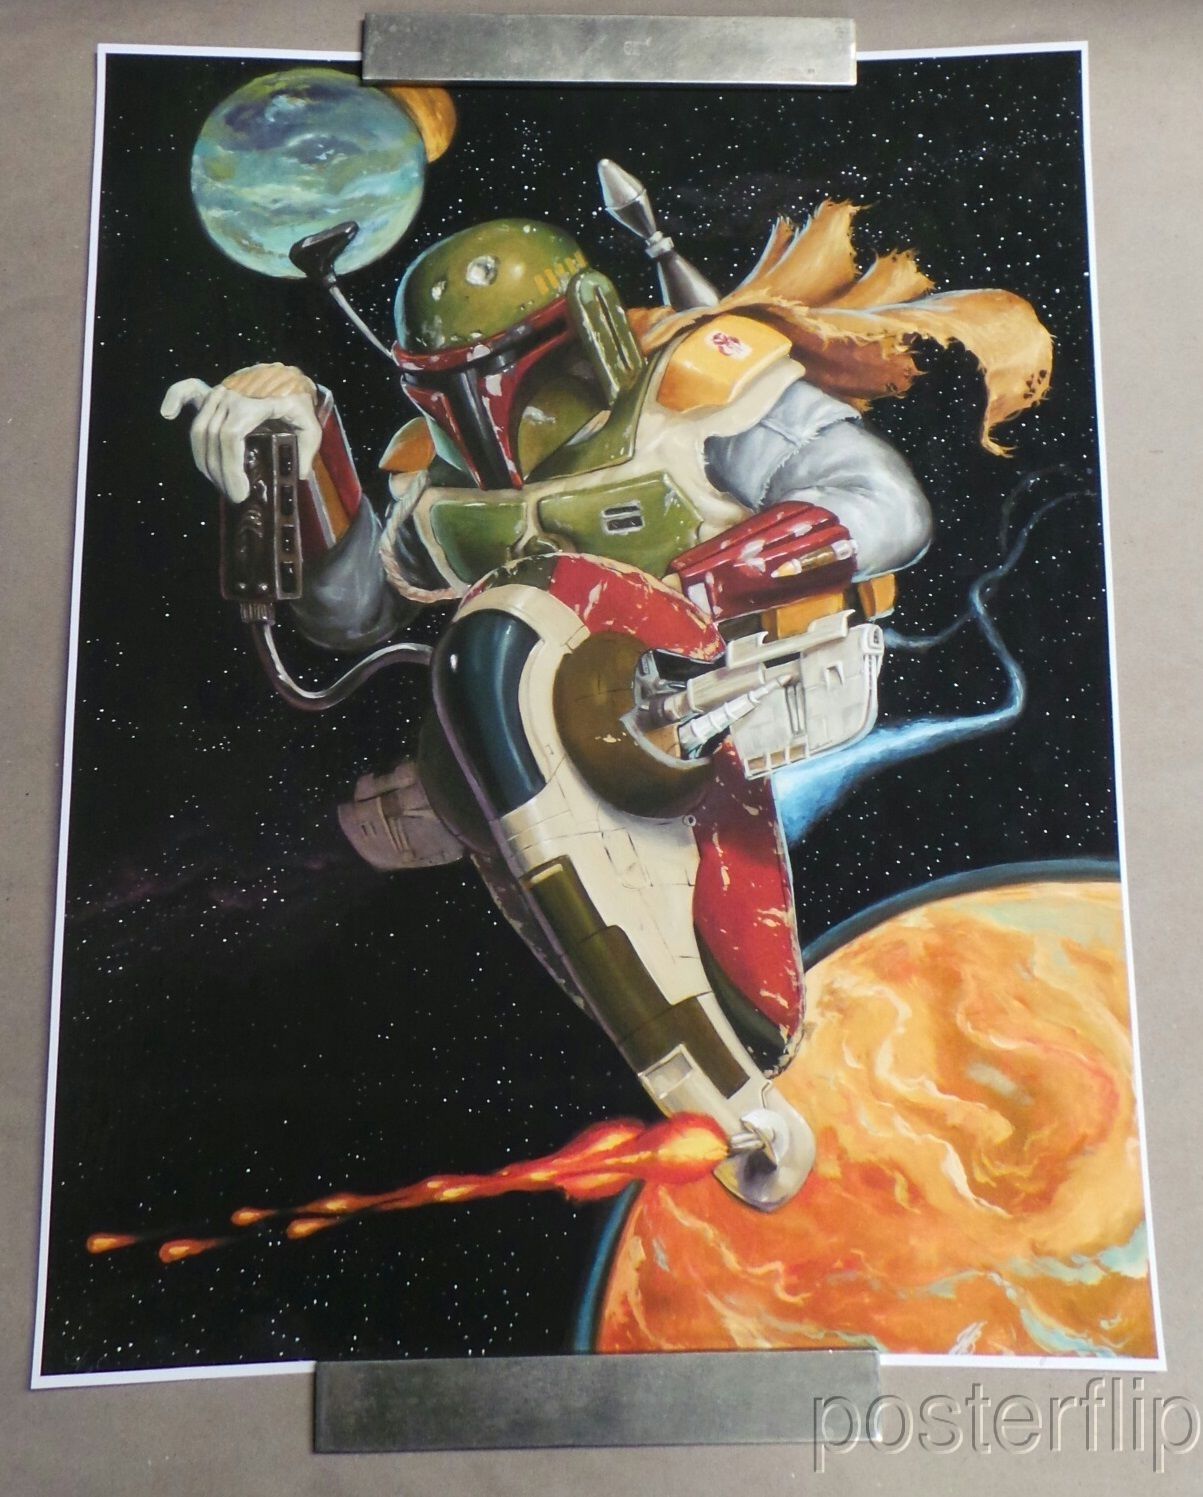 Title: Supercharged Slave 1  Artist: Jonathan Bergeron  Edition:Released in 2014 and printed in a limited edition of 50, signed and numbered by the artist.  Type: Screen Print Poster  Size: 16" x 20"  Notes:  Inspired by Star Wars.  Prints are stored flat in very good condition. Following purchase, prints are rolled in archival paper and shipped with bubble wrap in sturdy cardboard tubes.  Check out our other listings for more hard-to-find and out-of-print posters.